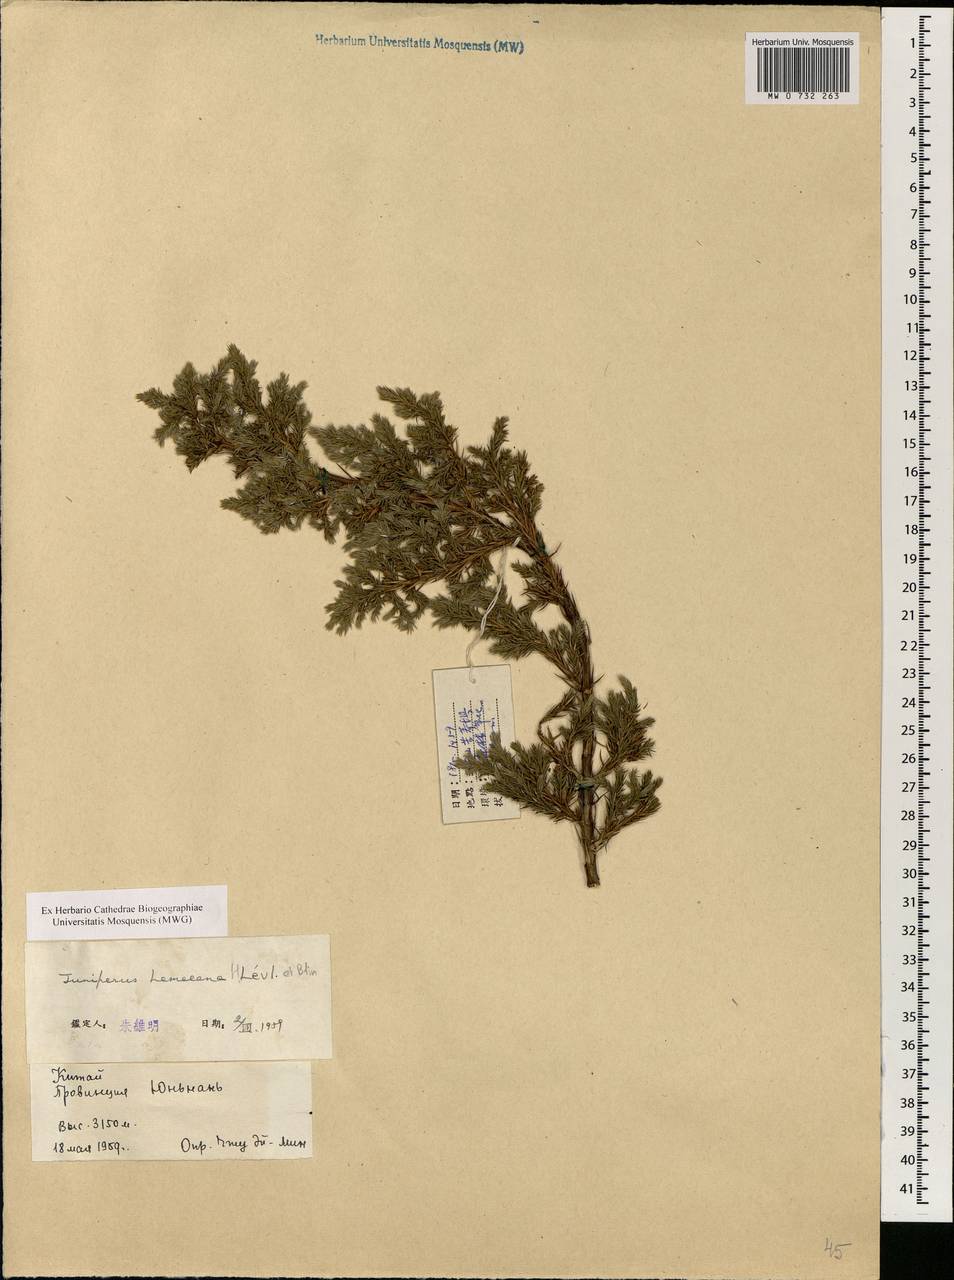 Juniperus squamata Buch.-Ham. ex D. Don, South Asia, South Asia (Asia outside ex-Soviet states and Mongolia) (ASIA) (China)